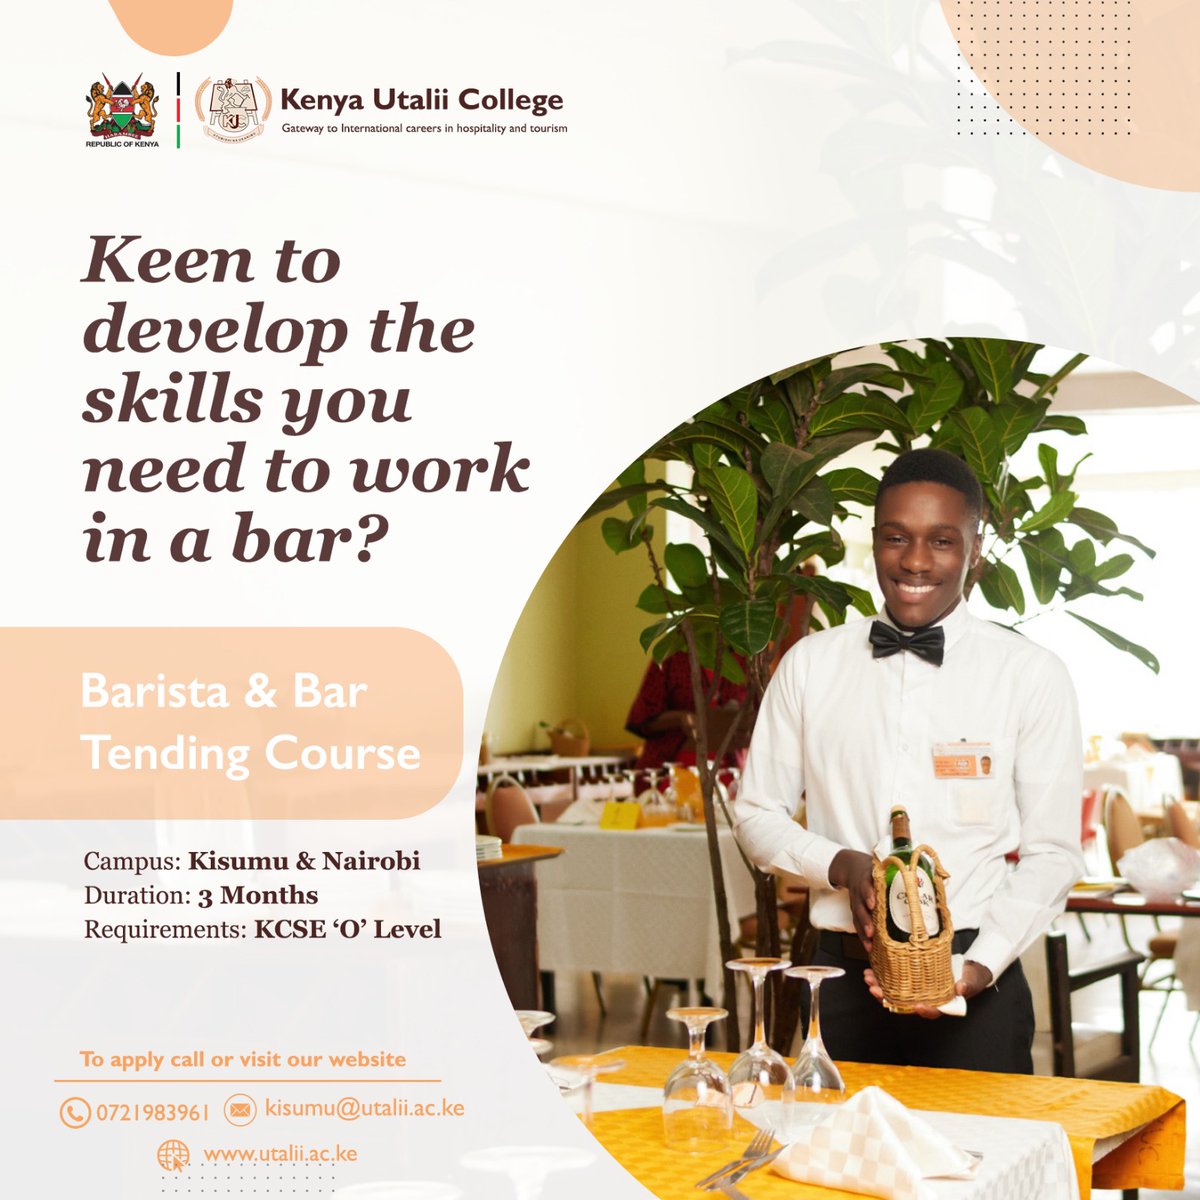 Keen to develop the skills you need to work in a bar? A Course in Barista & Bar Tending is good for you! Apply now for April/May intake both in Nairobi & Kisumu Campus.

KCSE O Level
3 Months
Kshs 40,000

Apply Here: bit.ly/3Q9kqHw

#KenyaUtalii #utaliikisumucampus